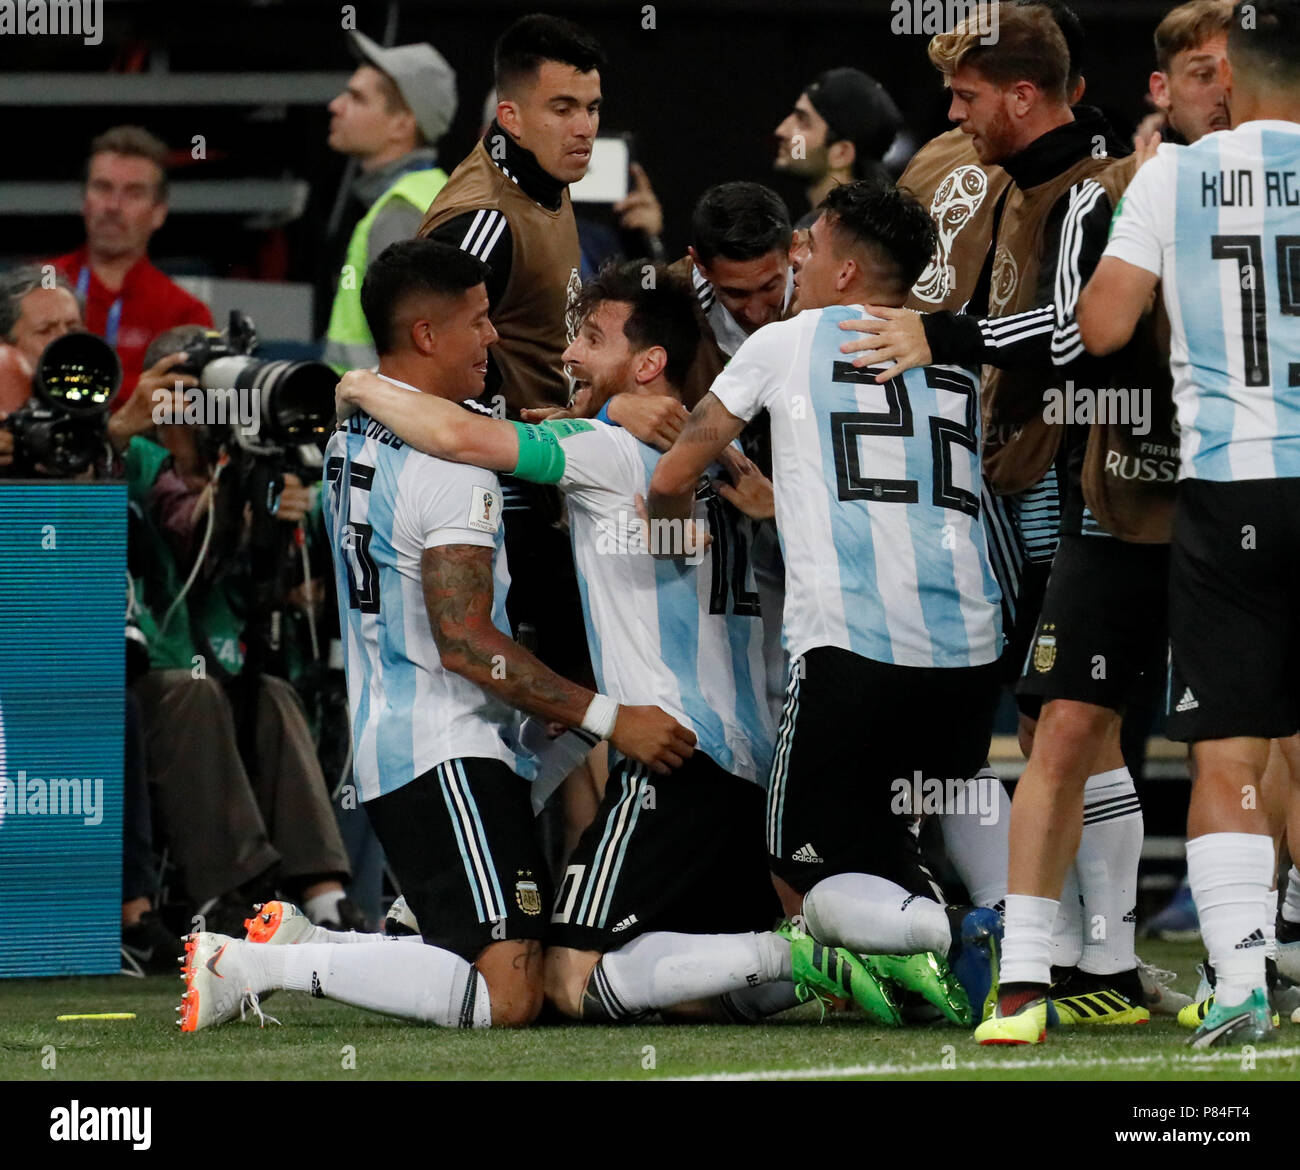 SAINT PETERSBURG, RUSSIA - JUNE 26: Marcos Rojo (L) of Argentina national team celebrates his goal with teammates during the 2018 FIFA World Cup Russia group D match between Nigeria and Argentina at Saint Petersburg Stadium on June 26, 2018 in Saint Petersburg, Russia. (MB Media) Stock Photo